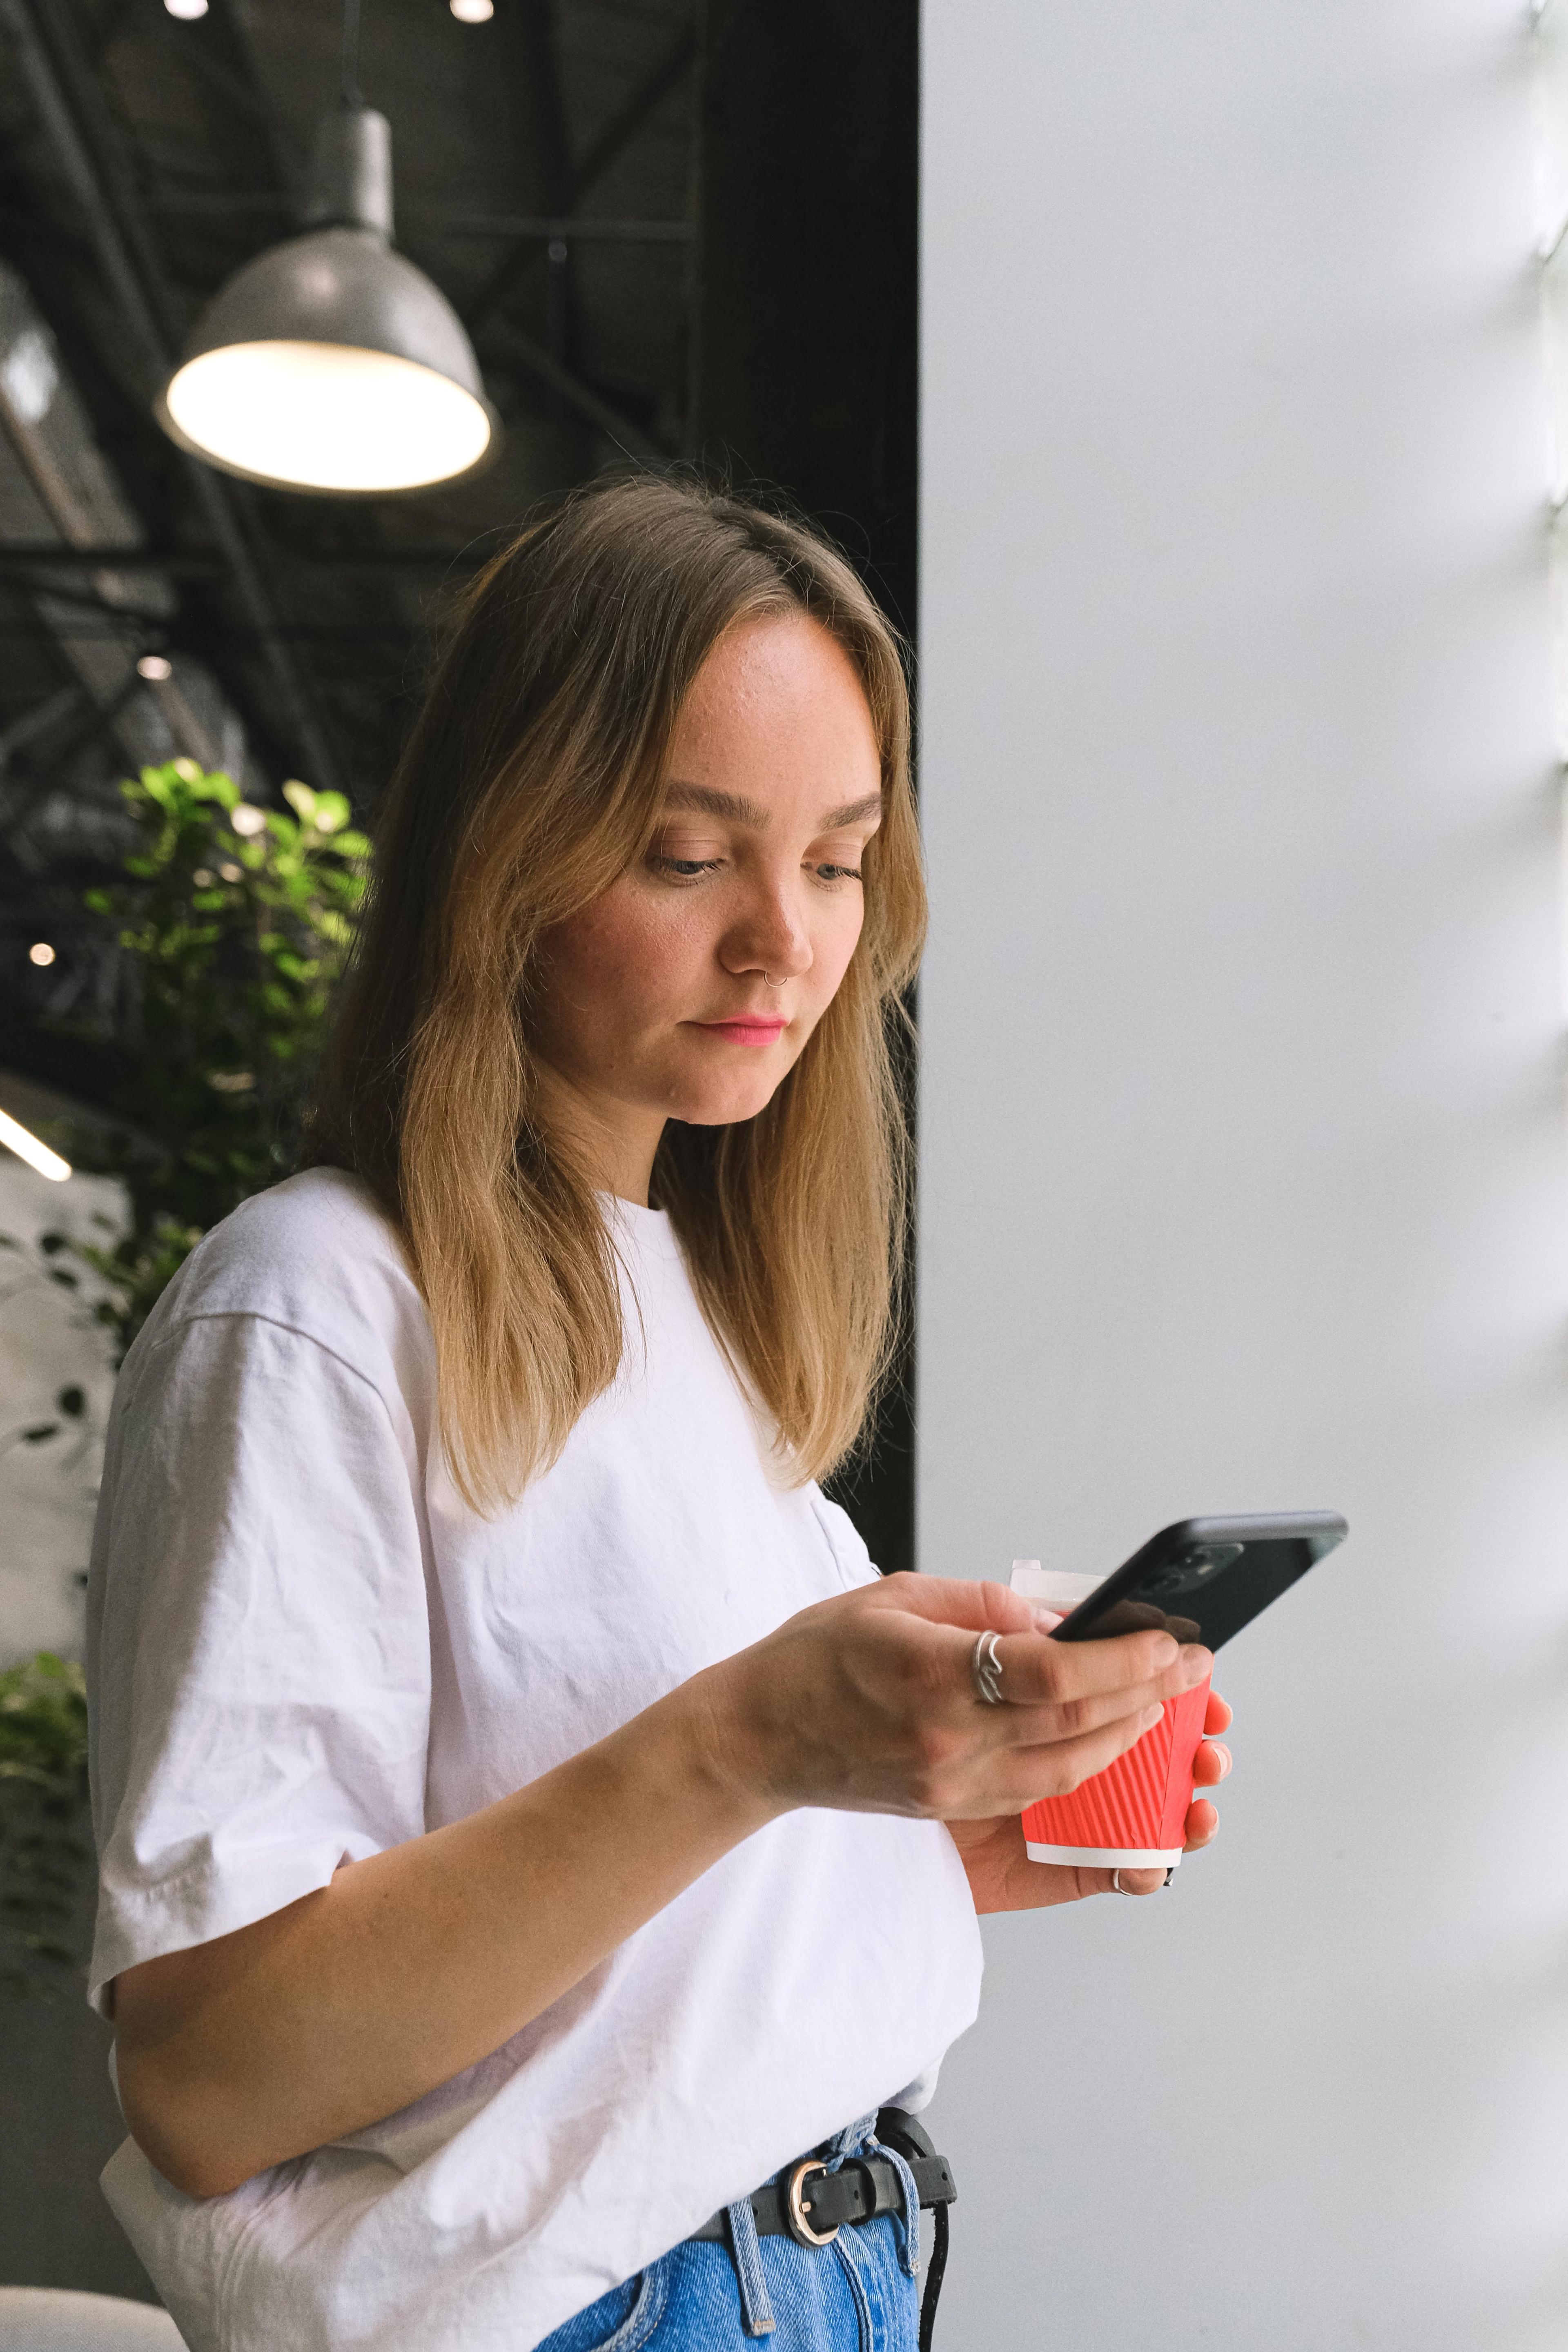 A woman in a white t-shirt and jeans holds a cup of coffee and looks at her phone